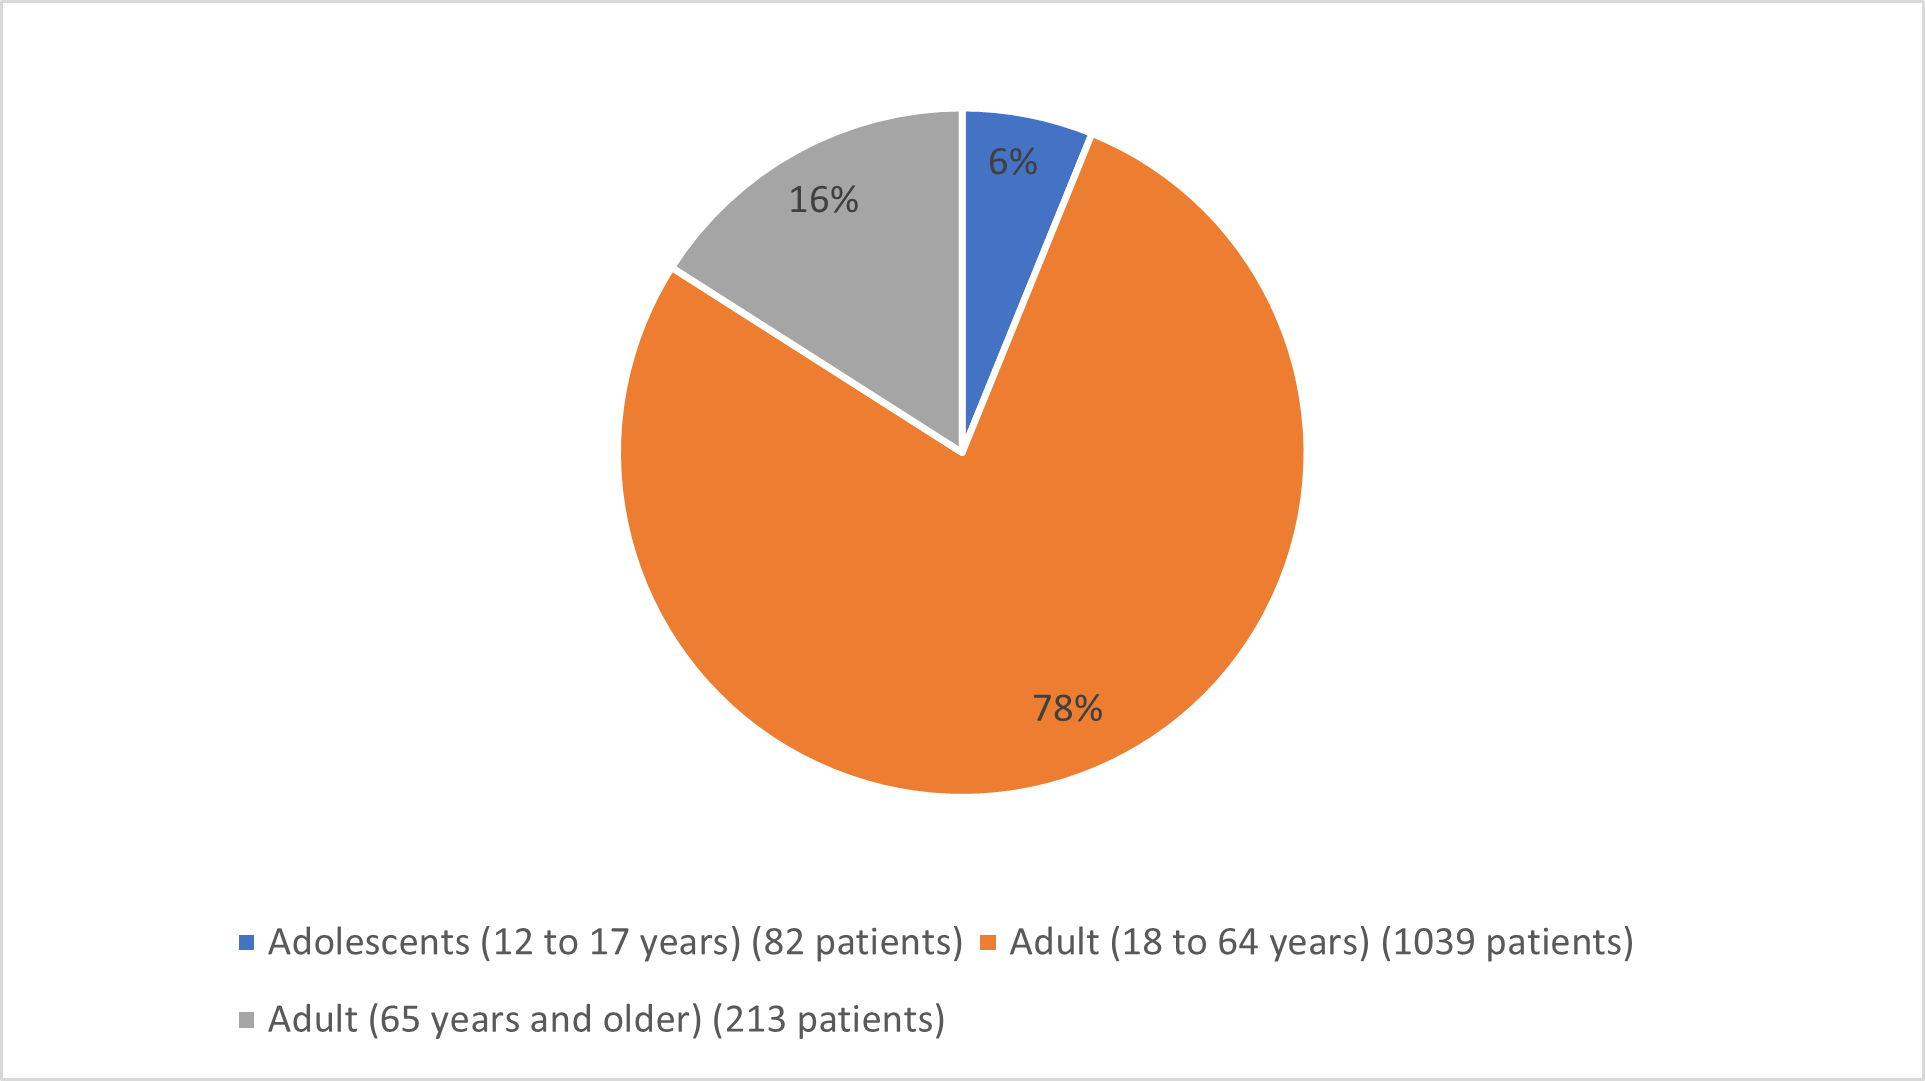 Pie chart summarizing how many patients by age were in the clinical trial. In total, 82(58%) patients were between the age of 12 and 17, 1039(78%) patients were between the age of 18 and 64 years of age and 213 (16%) patients were 65 years and older that participated in the clinical trial.